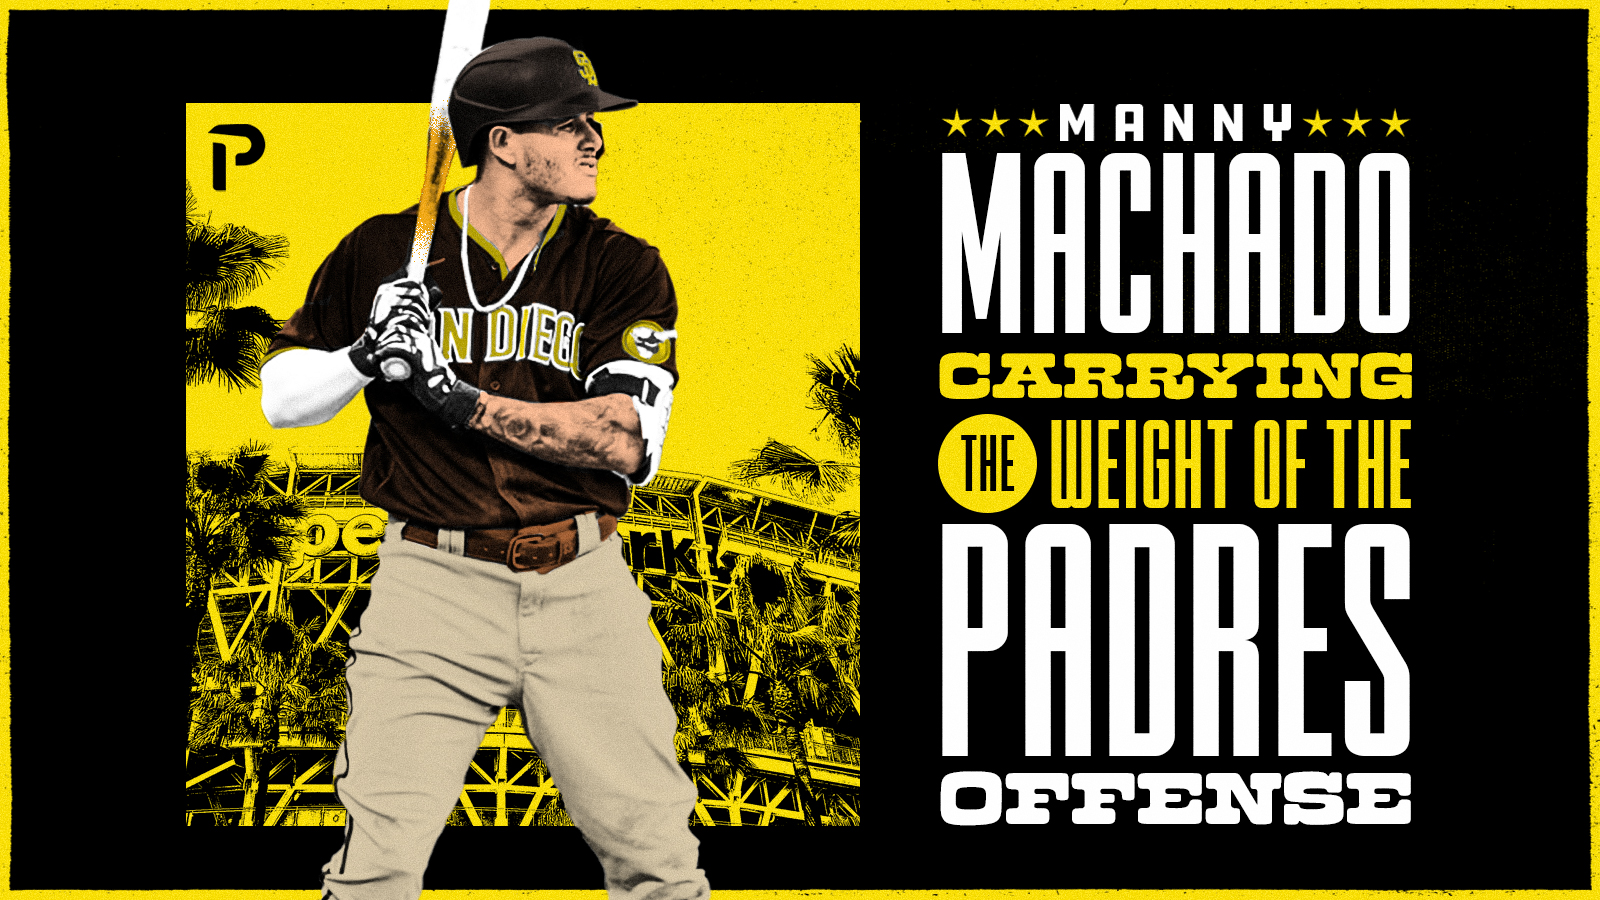 Manny Machado and the 'leadership void' at the San Diego Padres